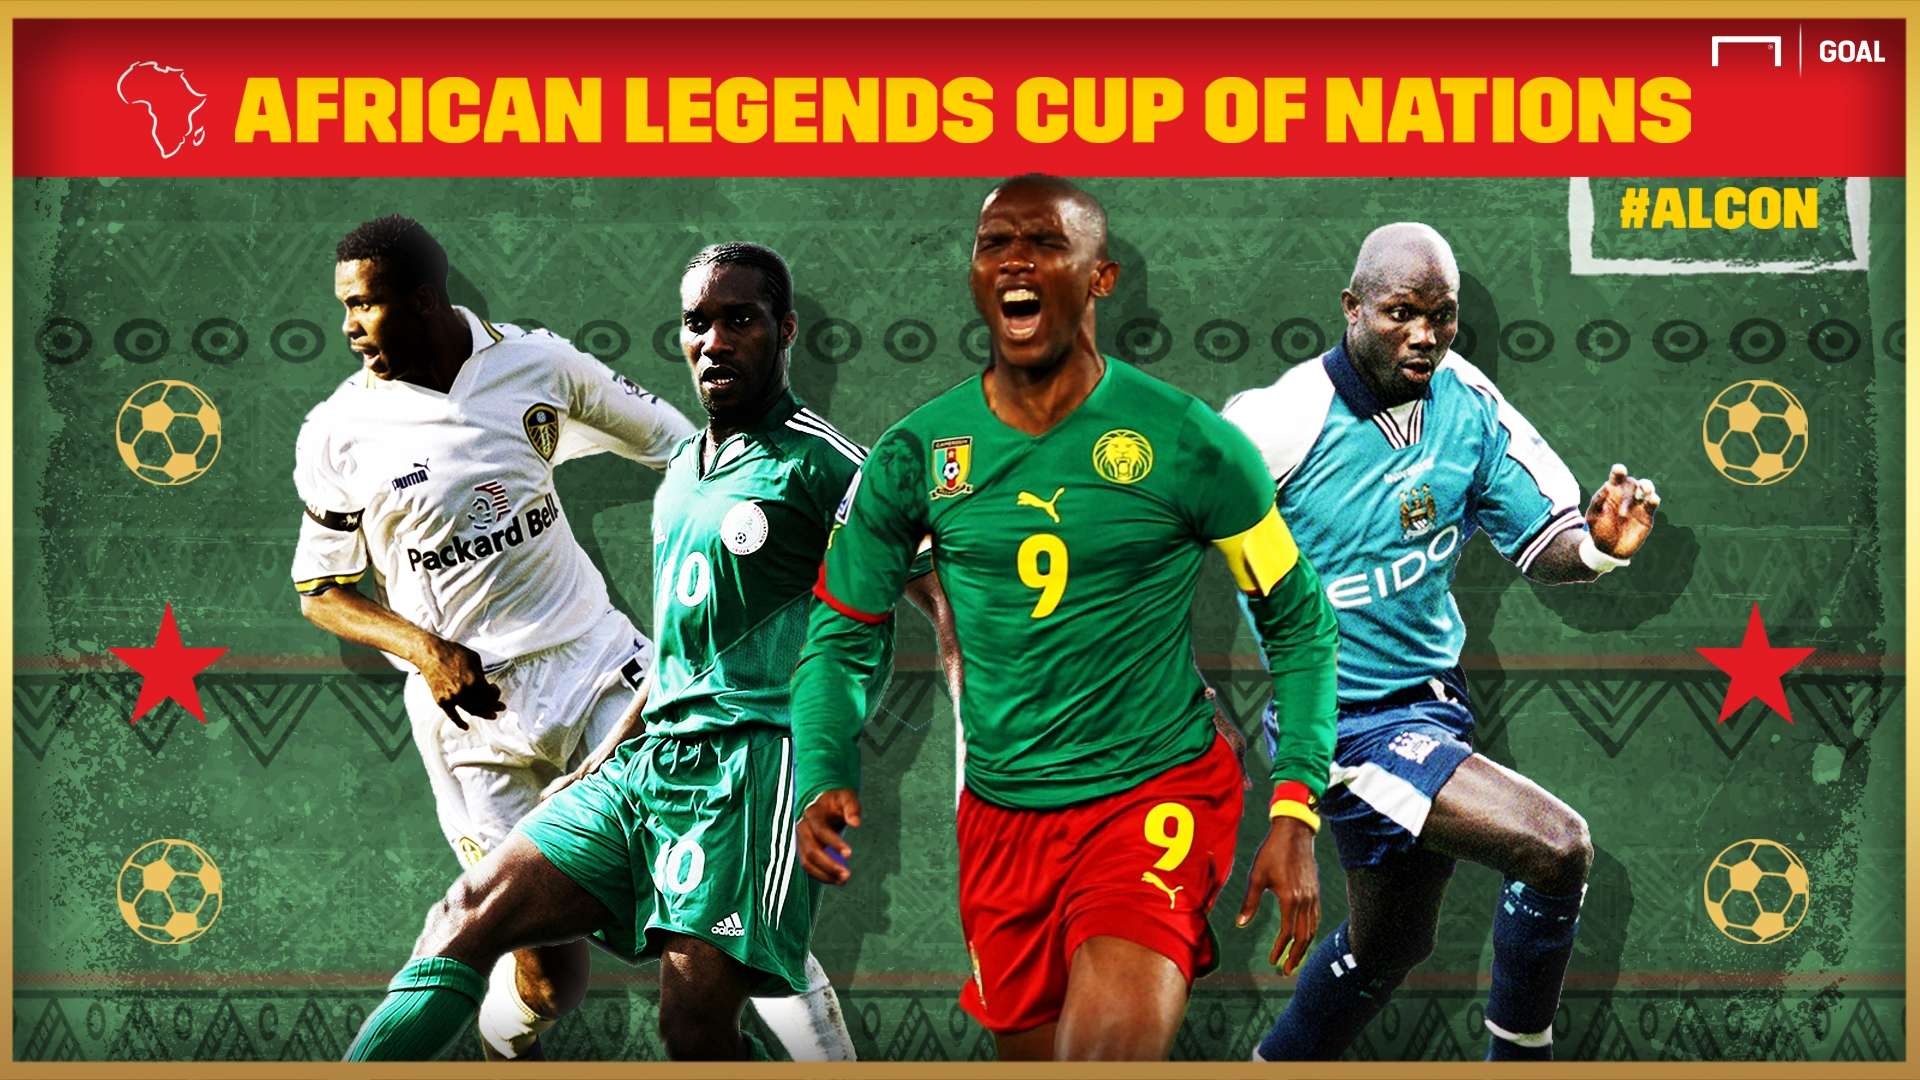 African Legends Cup of Nations